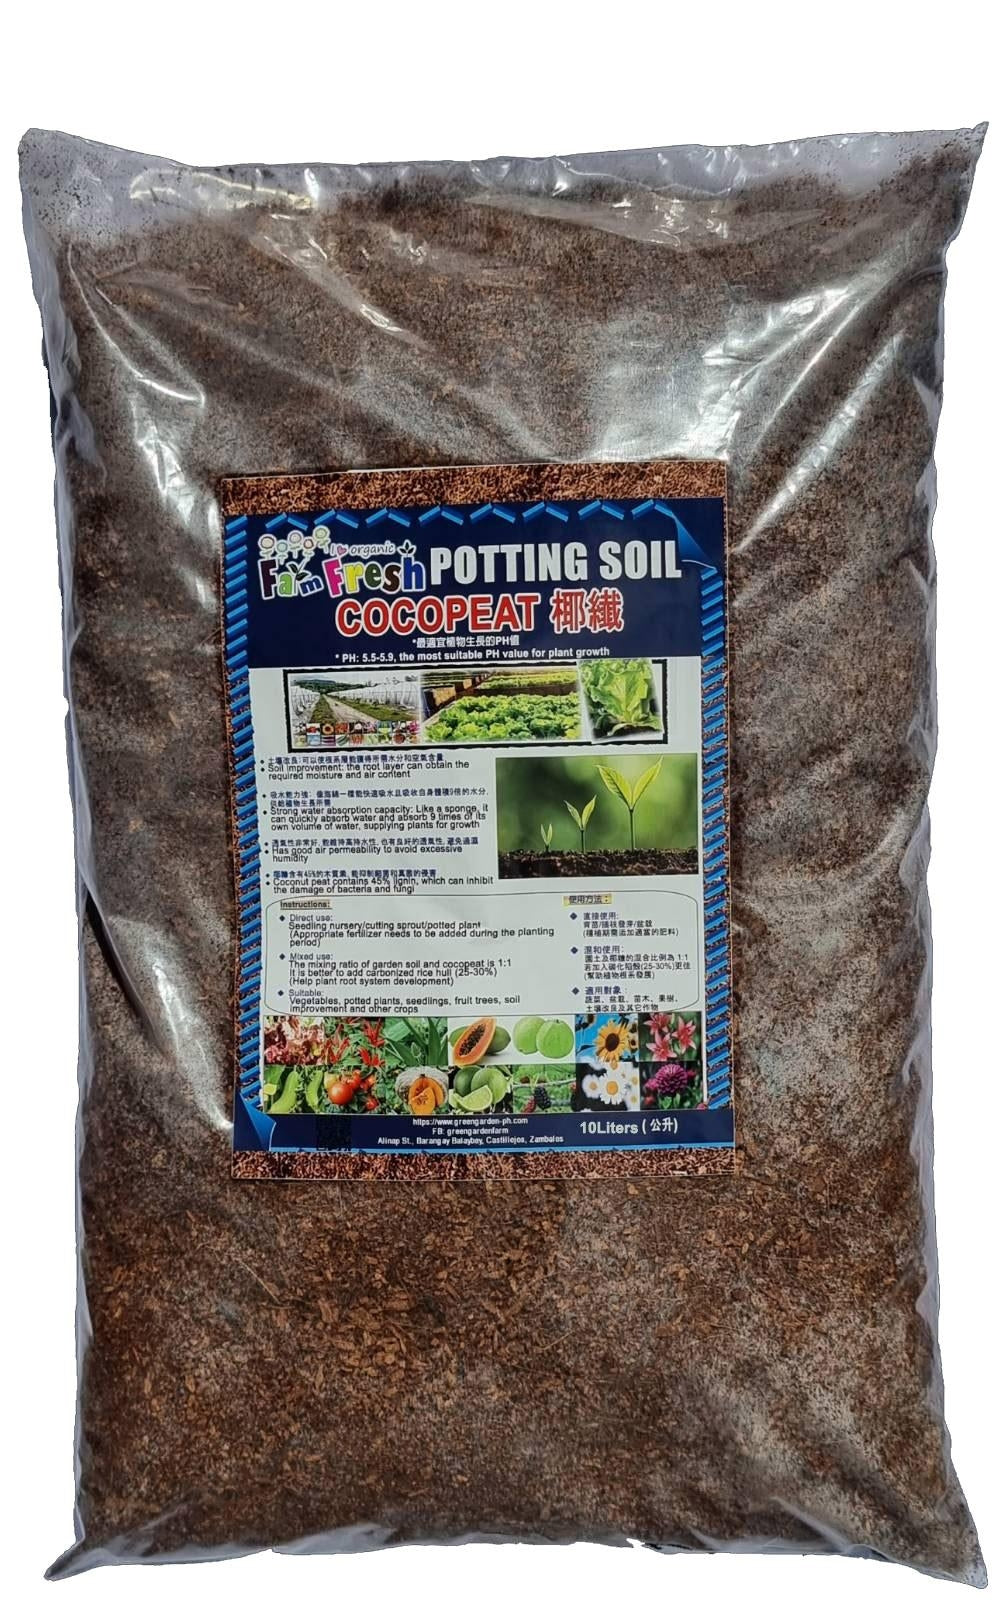 Cocopeat Potting Soil  (Fermented for 6 months and Screening of fibers)